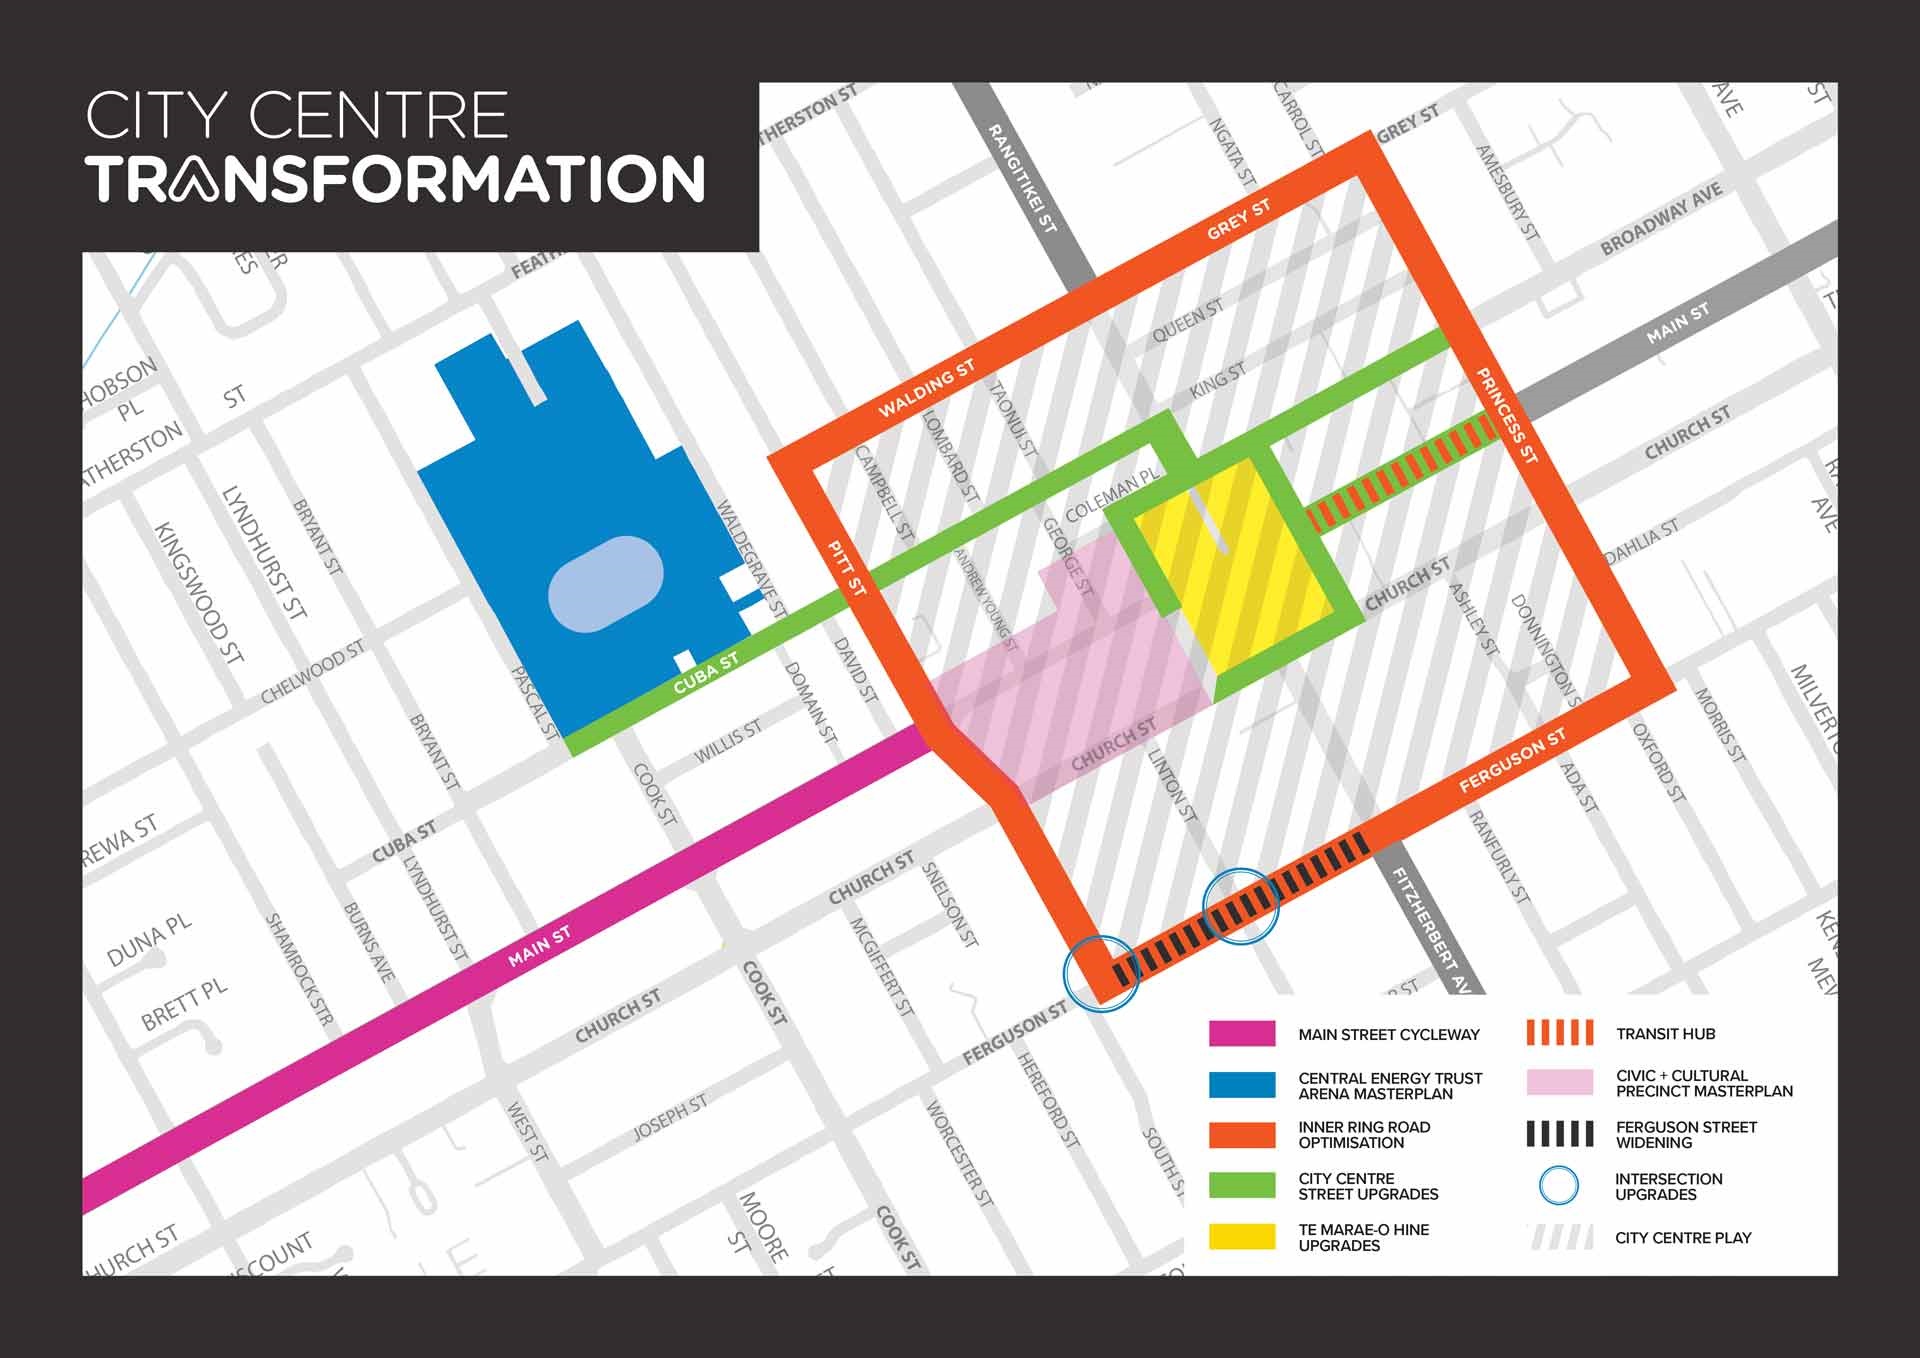 Map shows the plan for City Centre Transformation in Palmerston North.